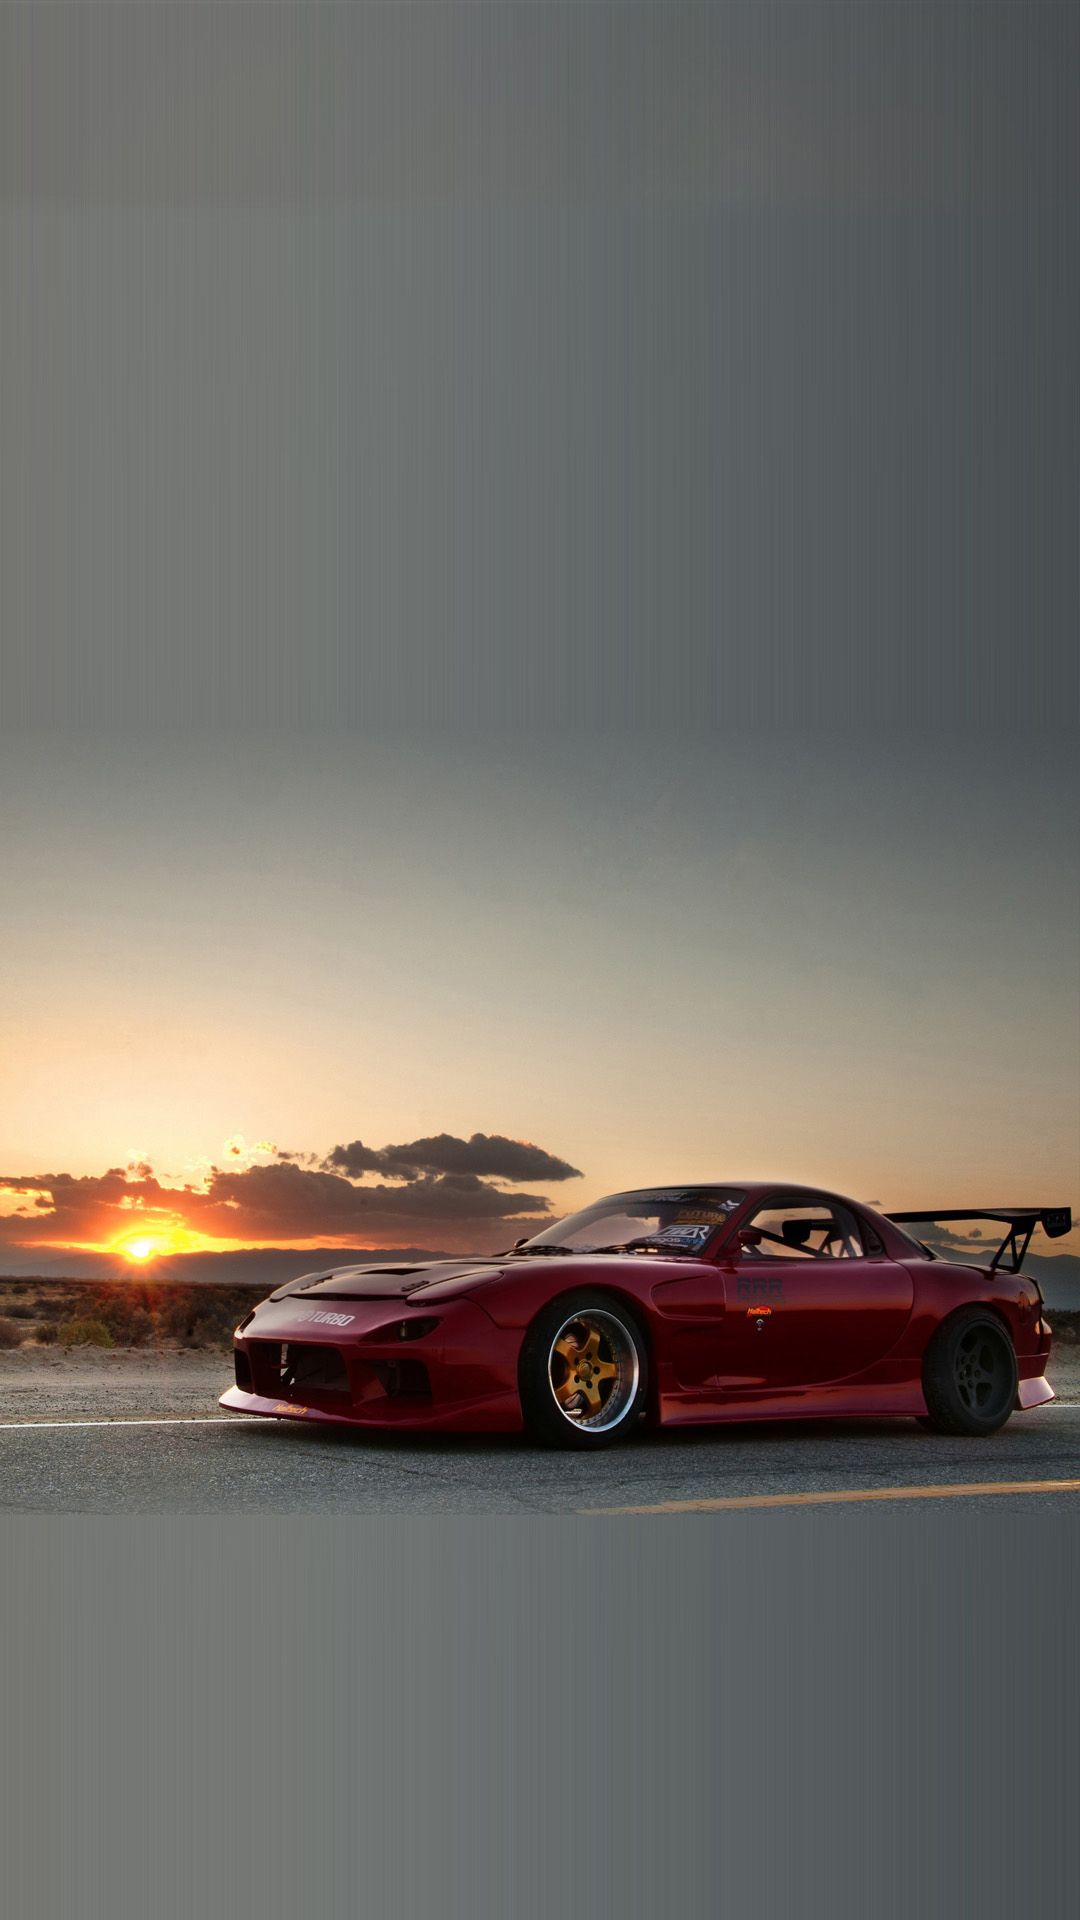 A red sports car on the road during sunset - JDM